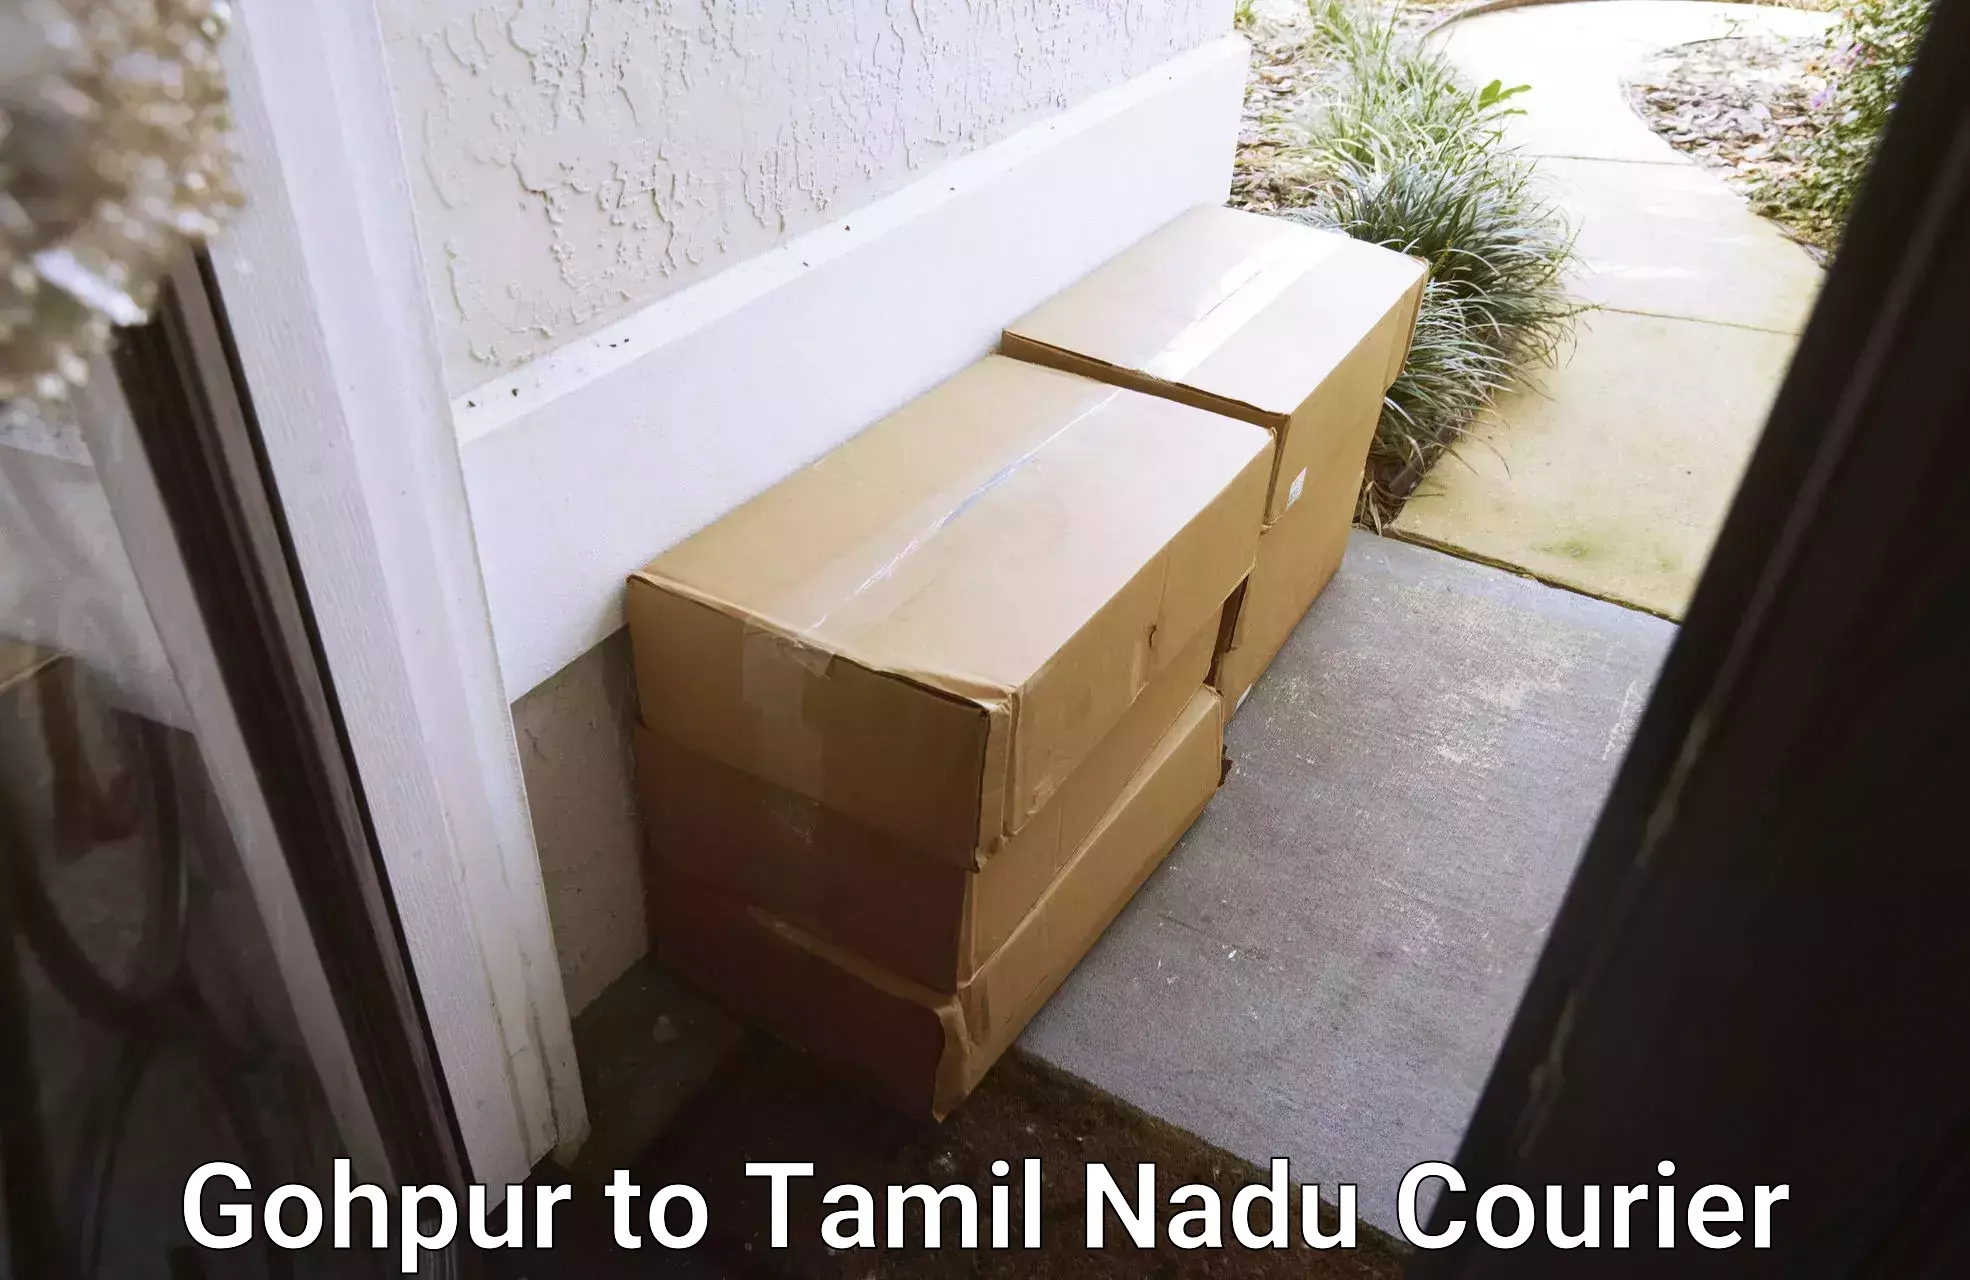 Professional courier services Gohpur to Tamil Nadu